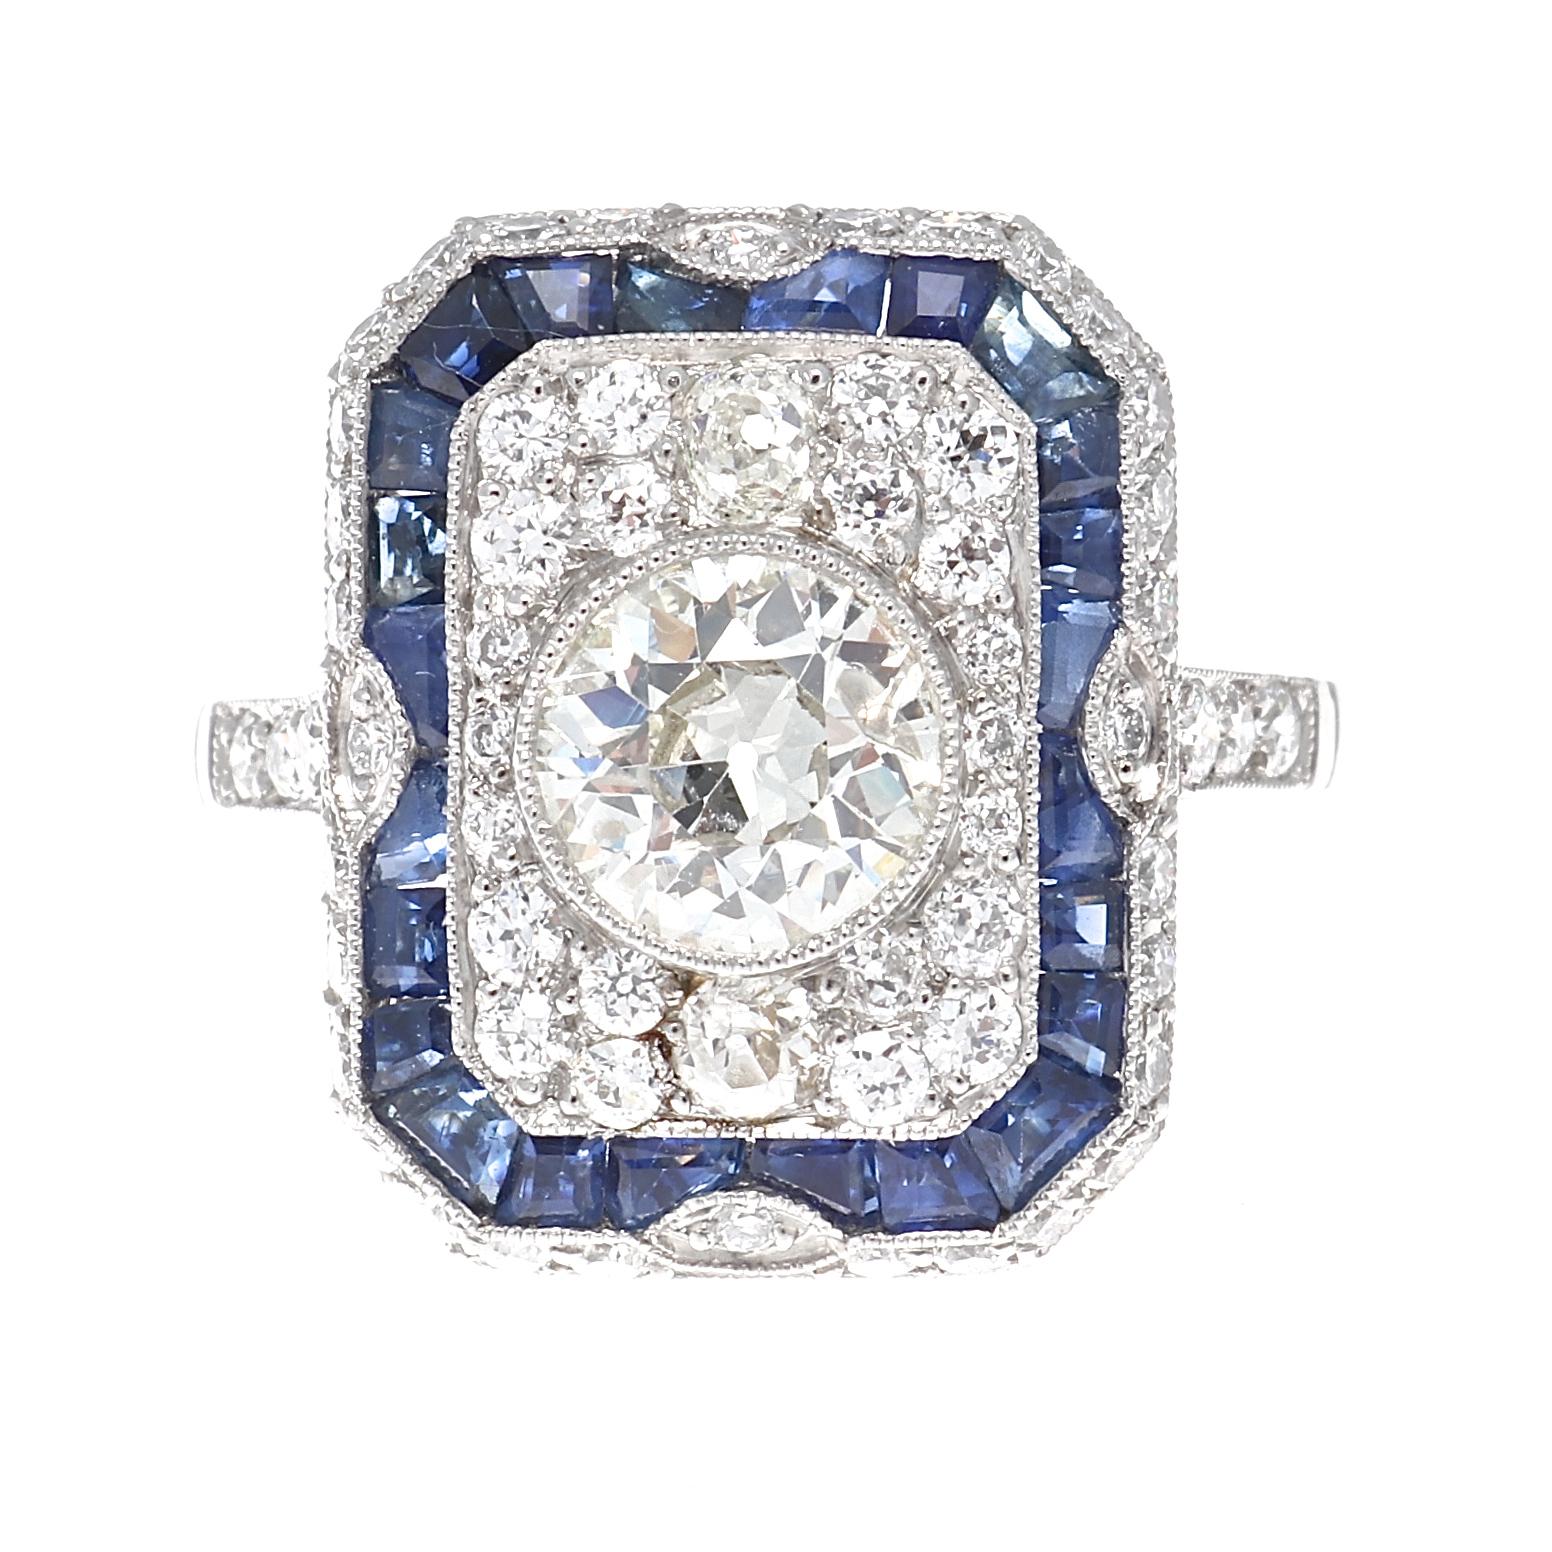 A burst of brilliance through geometric design and dazzling gemstones. Featuring a 1.01 carat old European cut diamond that is approximately L color, SI clarity. Surrounded by a treasure trove of near colorless diamonds and a splash of navy blue